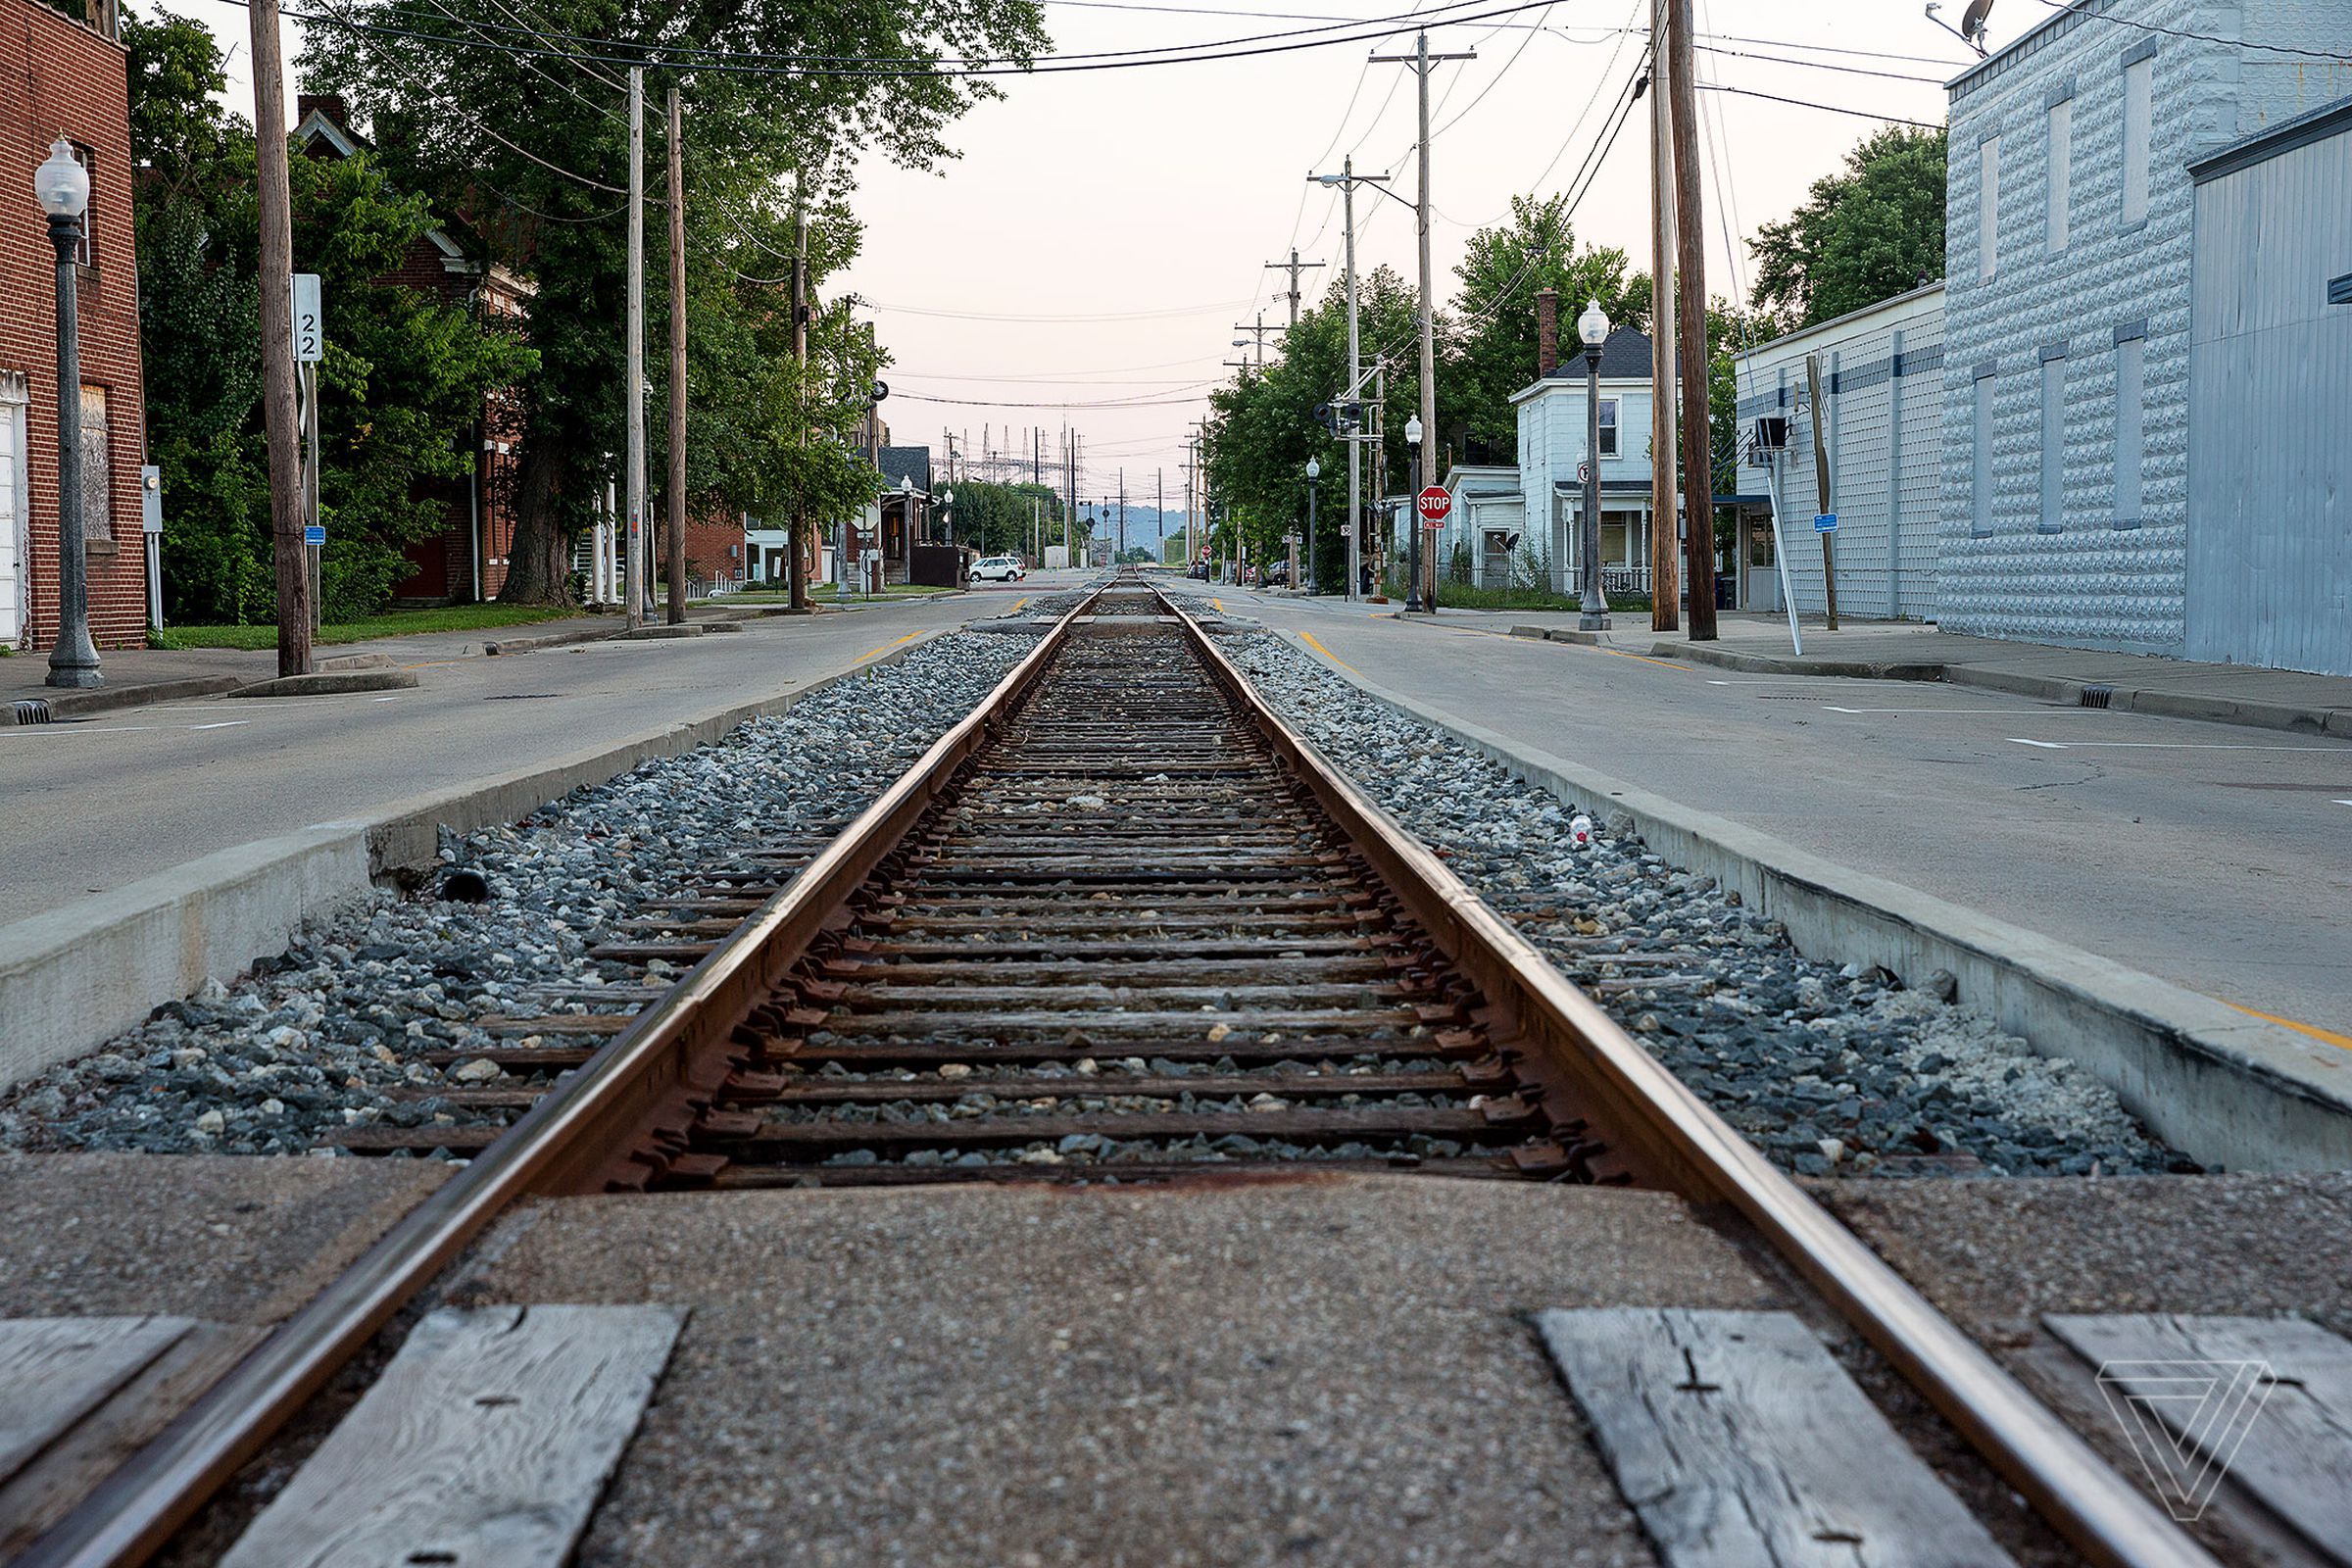 Train tracks cut through a revitalized section of downtown Lawrenceburg.